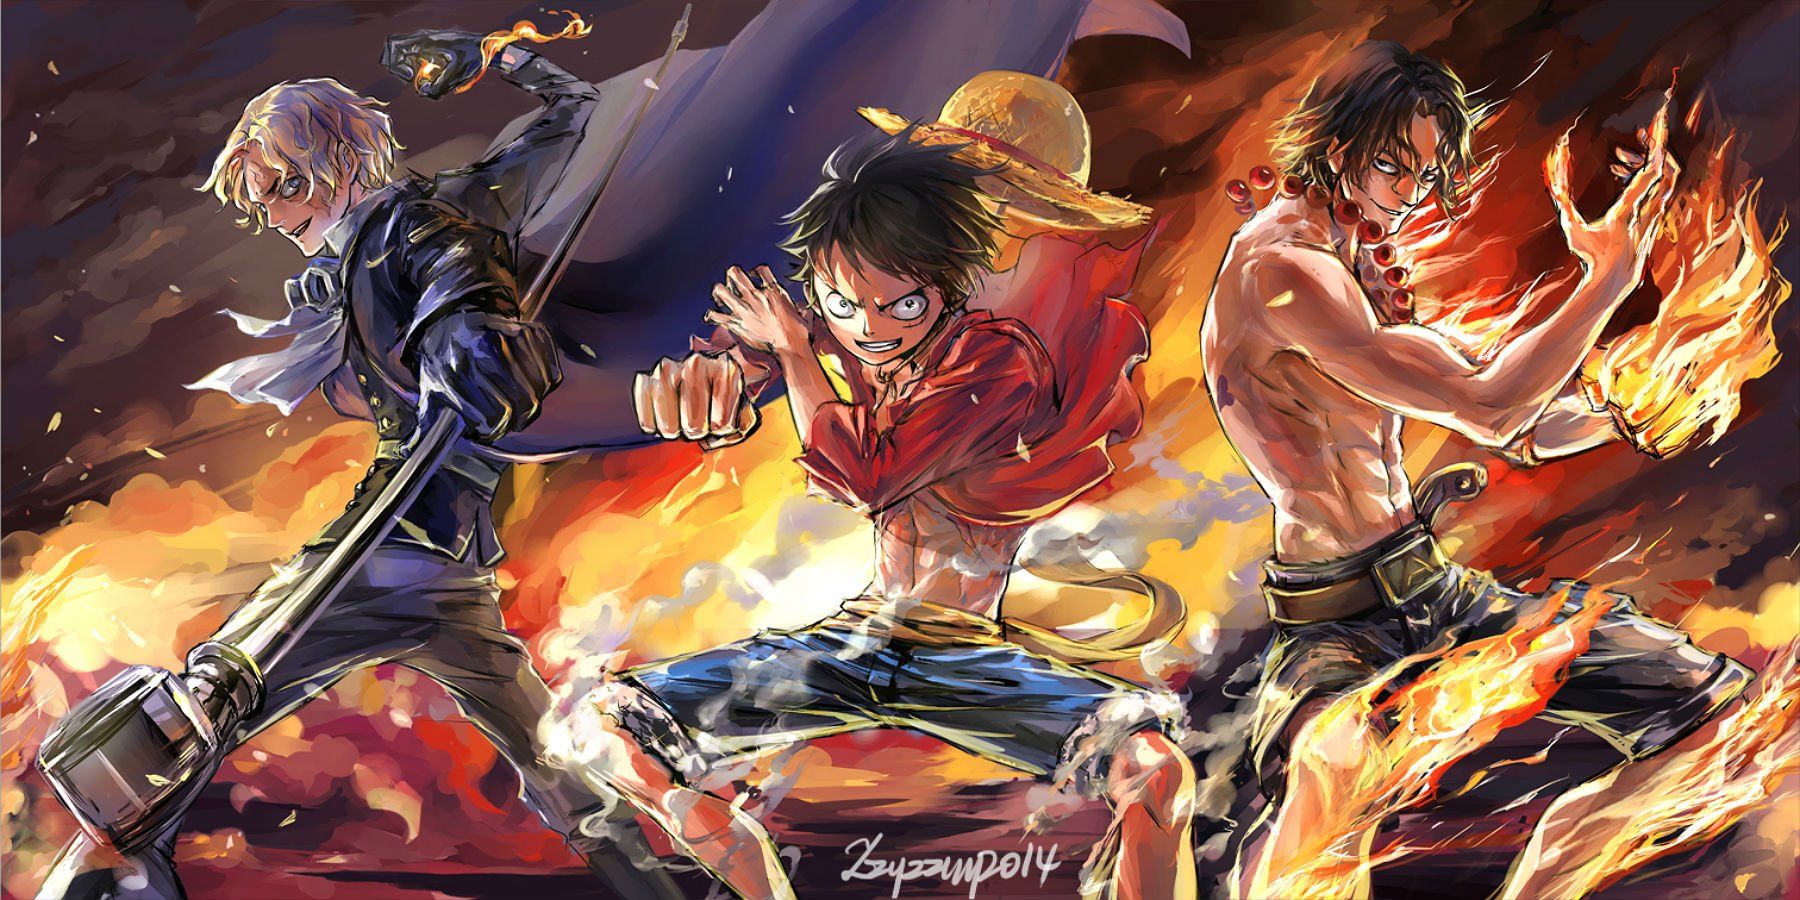 33 Portgas D. Ace HD Wallpapers | Backgrounds - Wallpaper Abyss